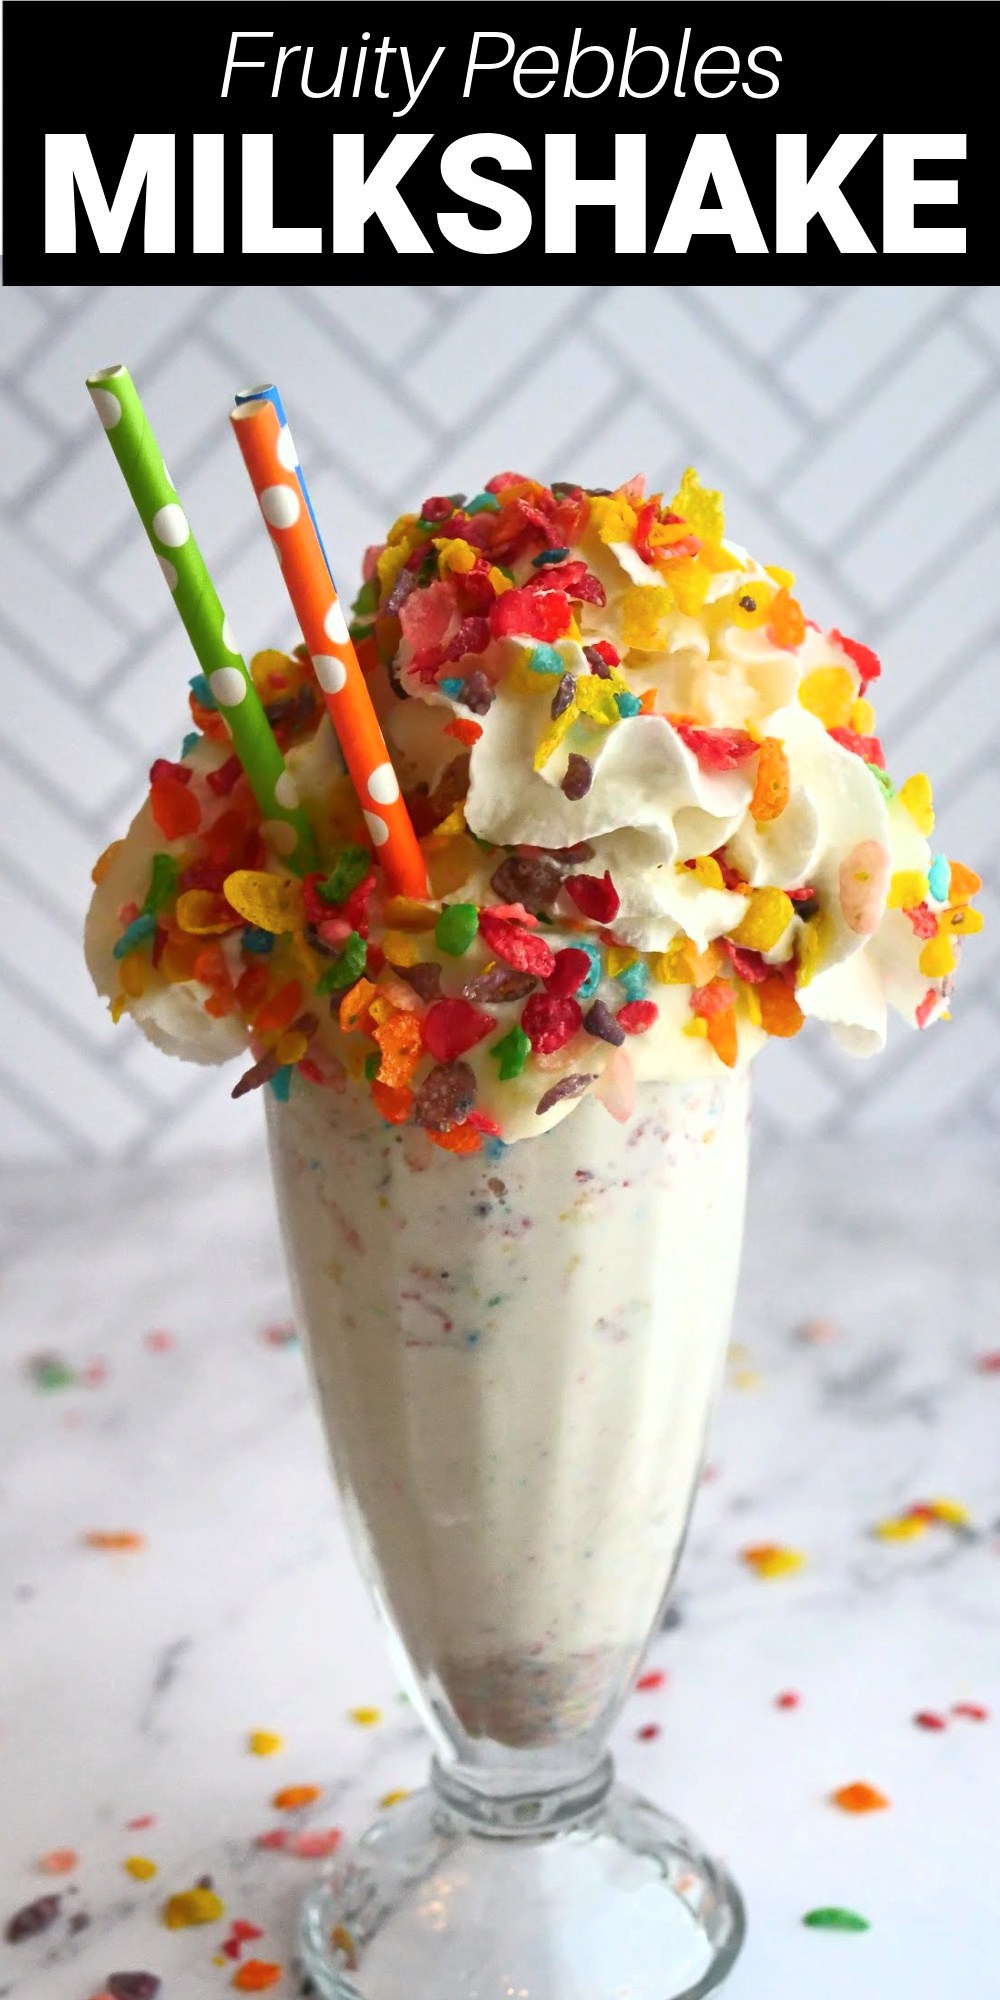 This Fruity Pebbles milkshake is a creamy vanilla ice cream milkshake infused fruity pebbles cereal and drizzled with strawberry syrup then topped with a heaping amount of whipped cream and more Fruity Pebbles as sprinkles. This colorful freak shake is my new favorite milkshake!